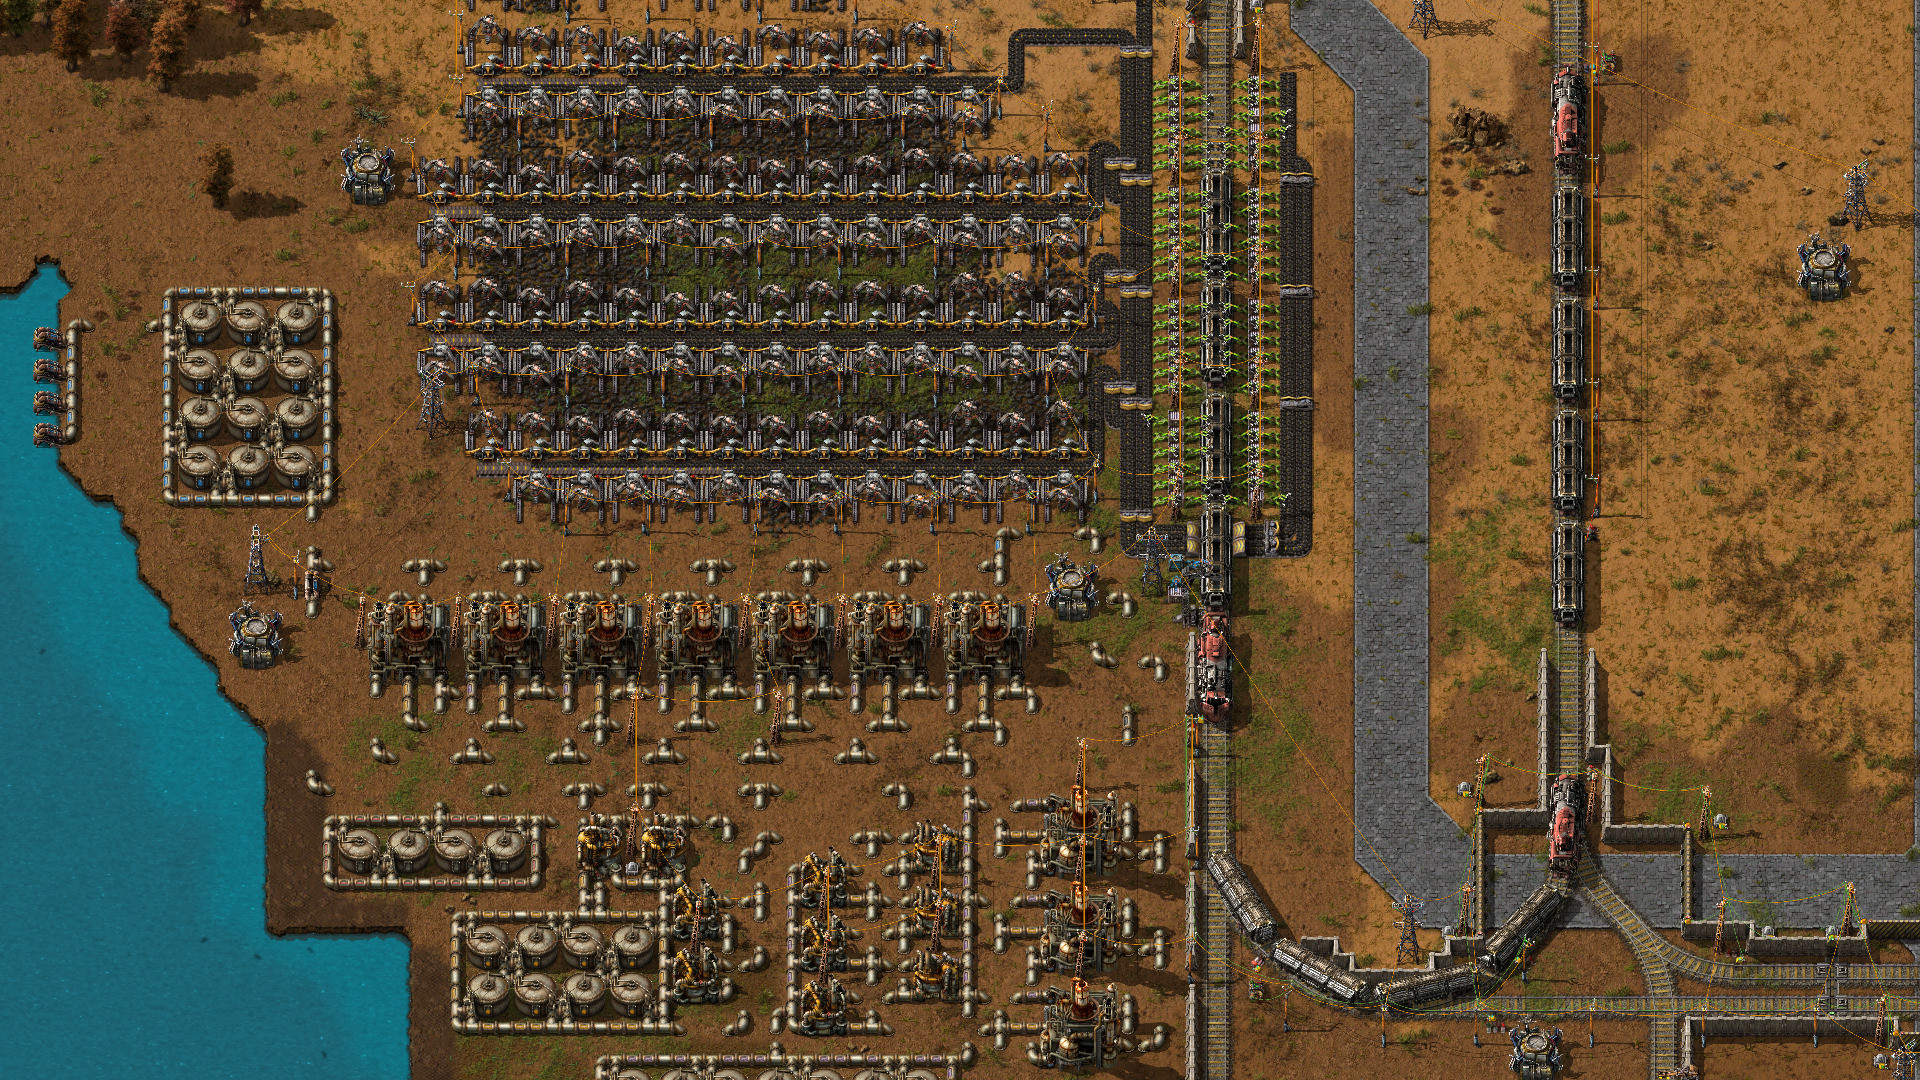 factorio download old version old save